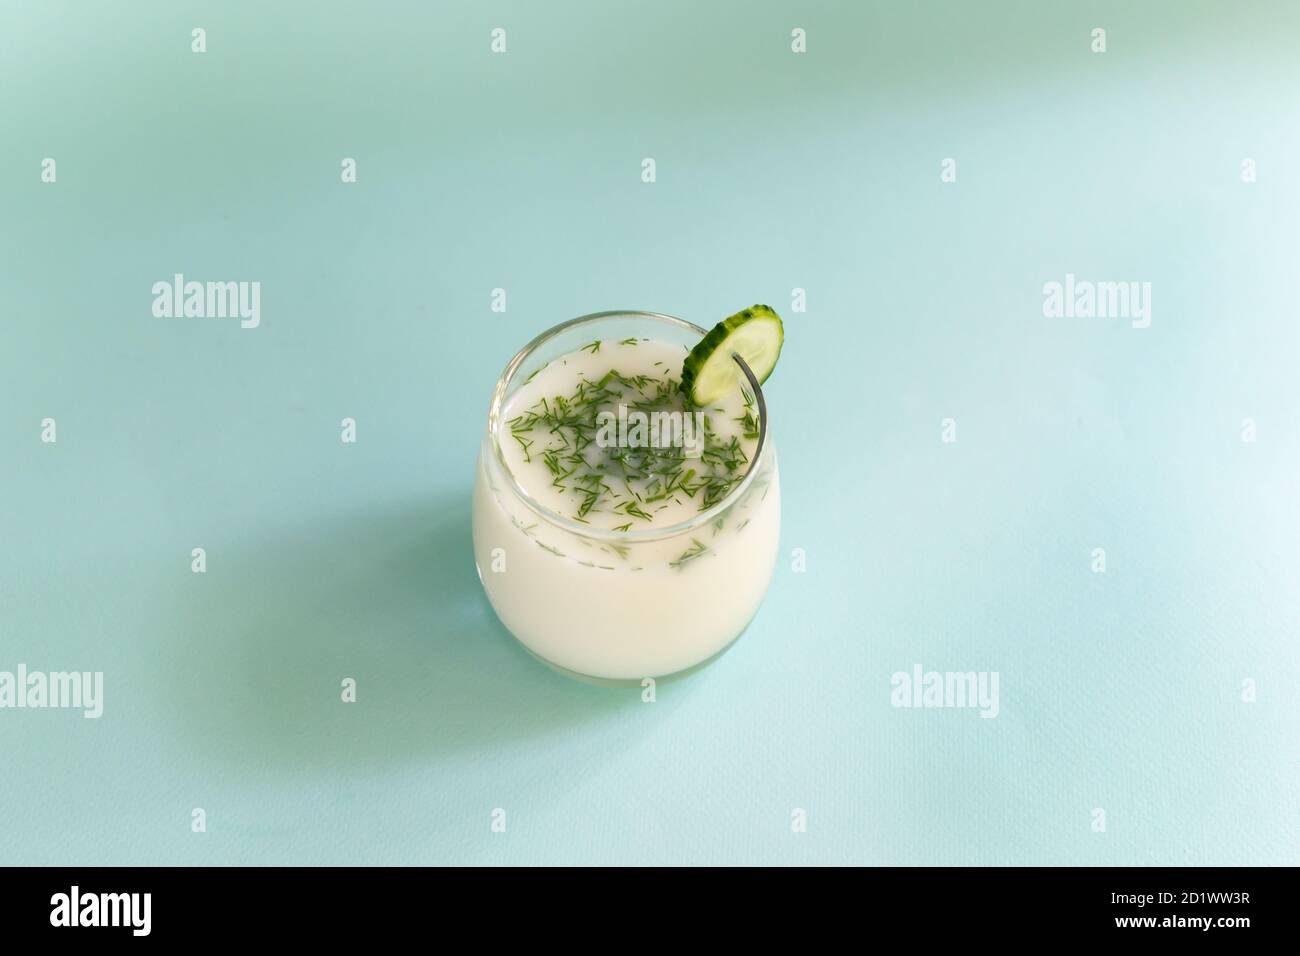 Ayran in a glass glass with dill and a slice of cucumber on a blue background. Fermented product concept. Copy space. Stock Photo